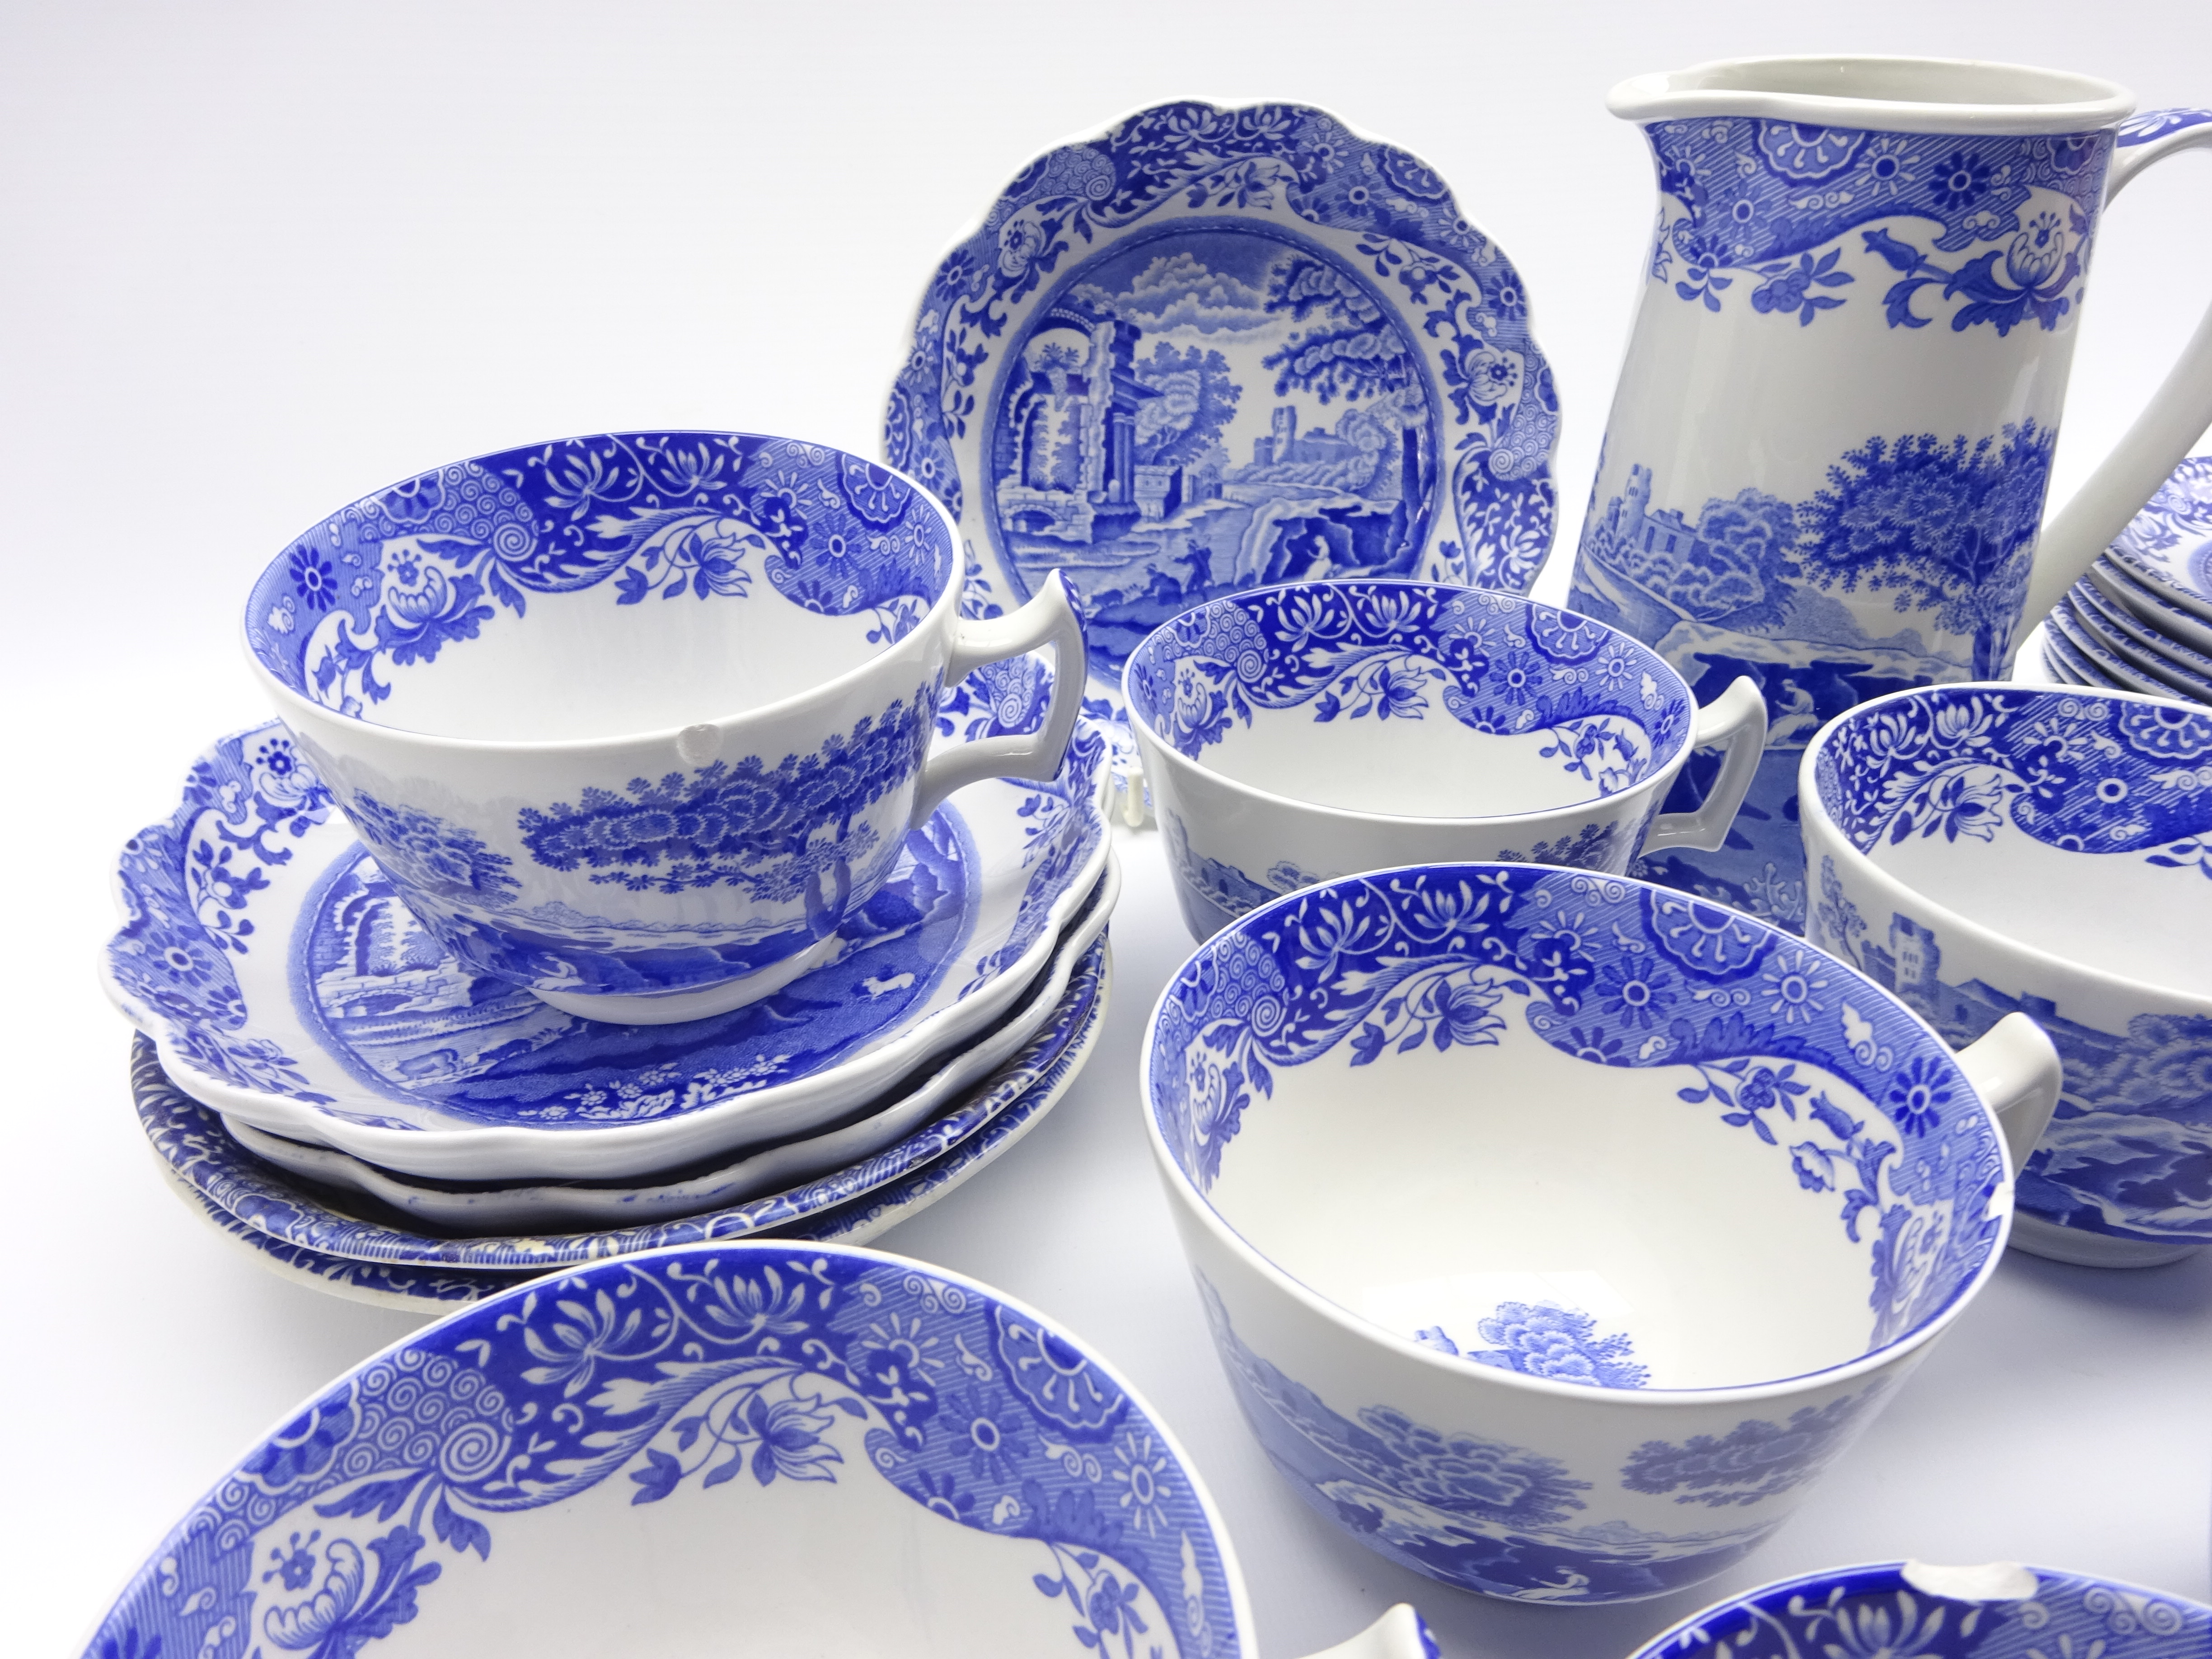 Nine Spode Italian pattern breakfast cups and saucers, butter dish and cover, toast rack, milk jug, - Image 3 of 3